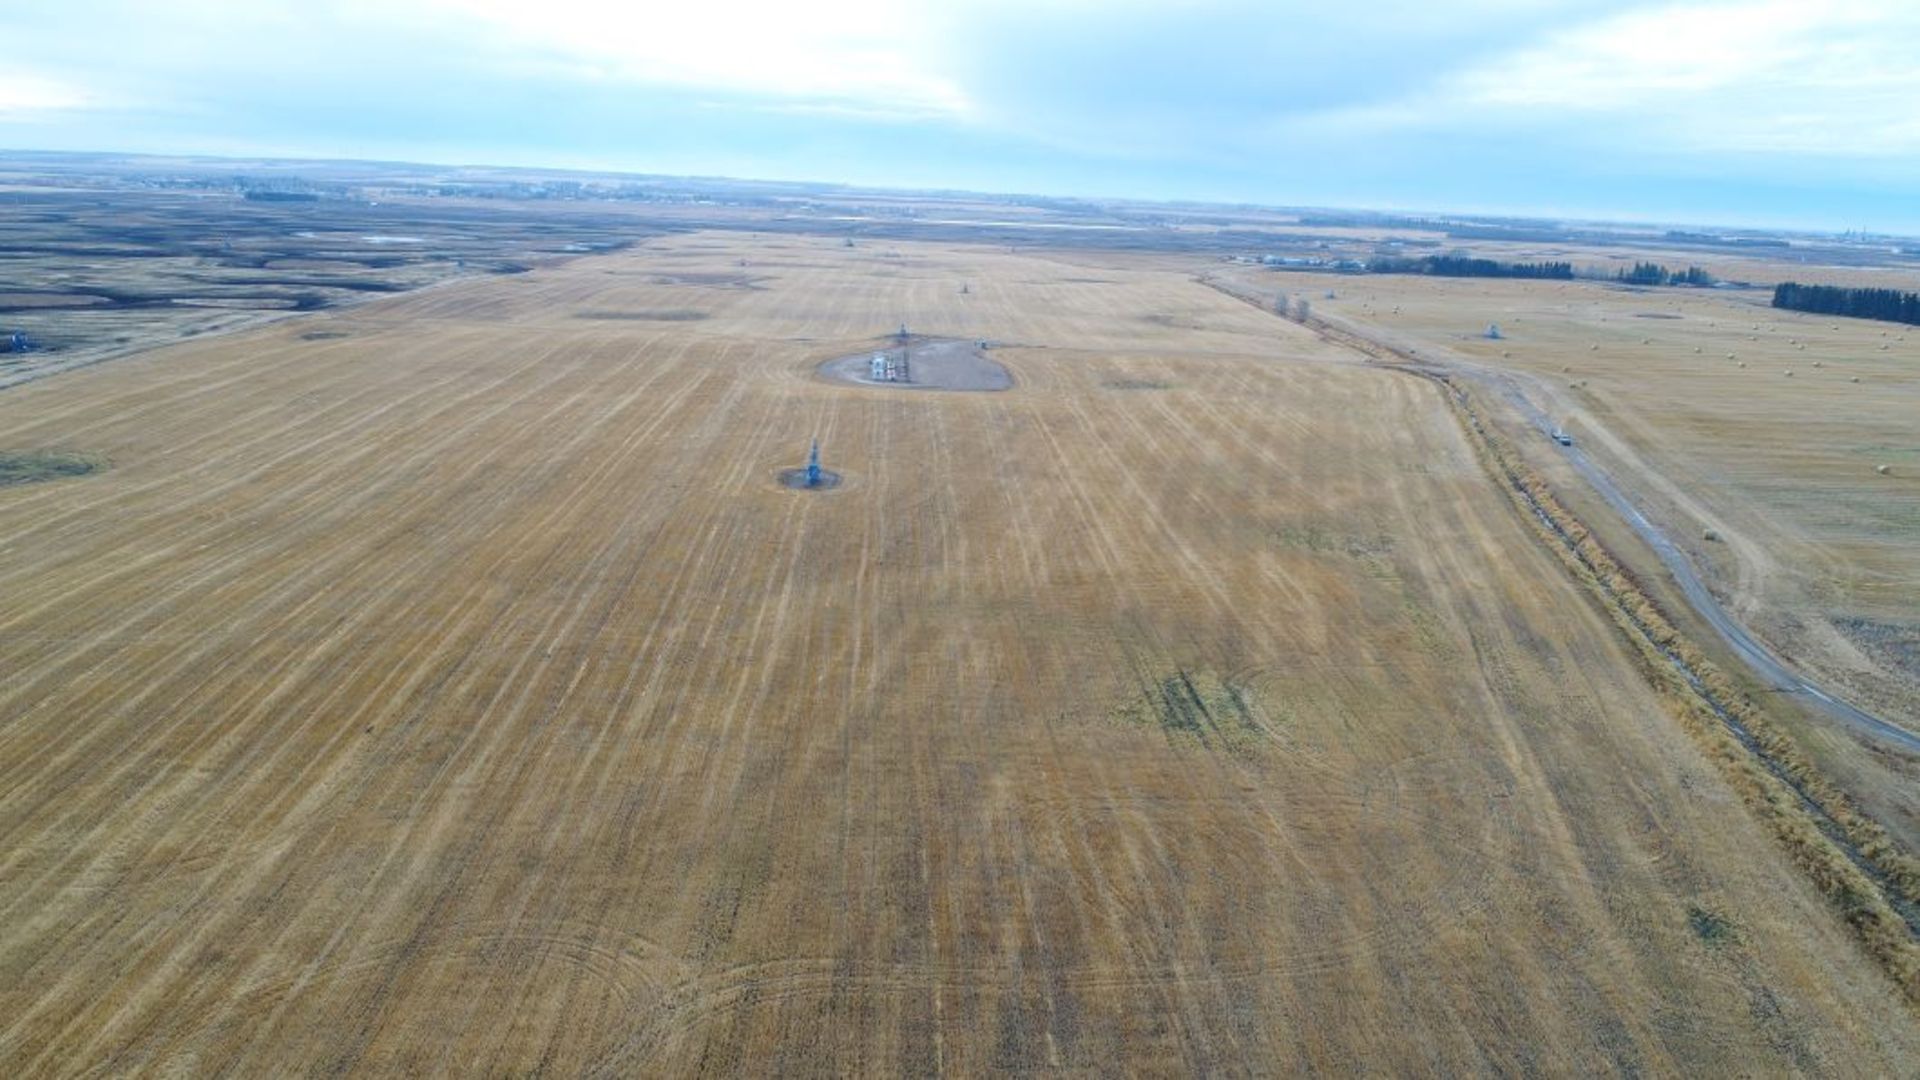 160+/- Total Acres NW 8-56-20-W4, Bruderheim, AB, consisting of Crop Land, Surface Lease & Yard Site - Image 21 of 34